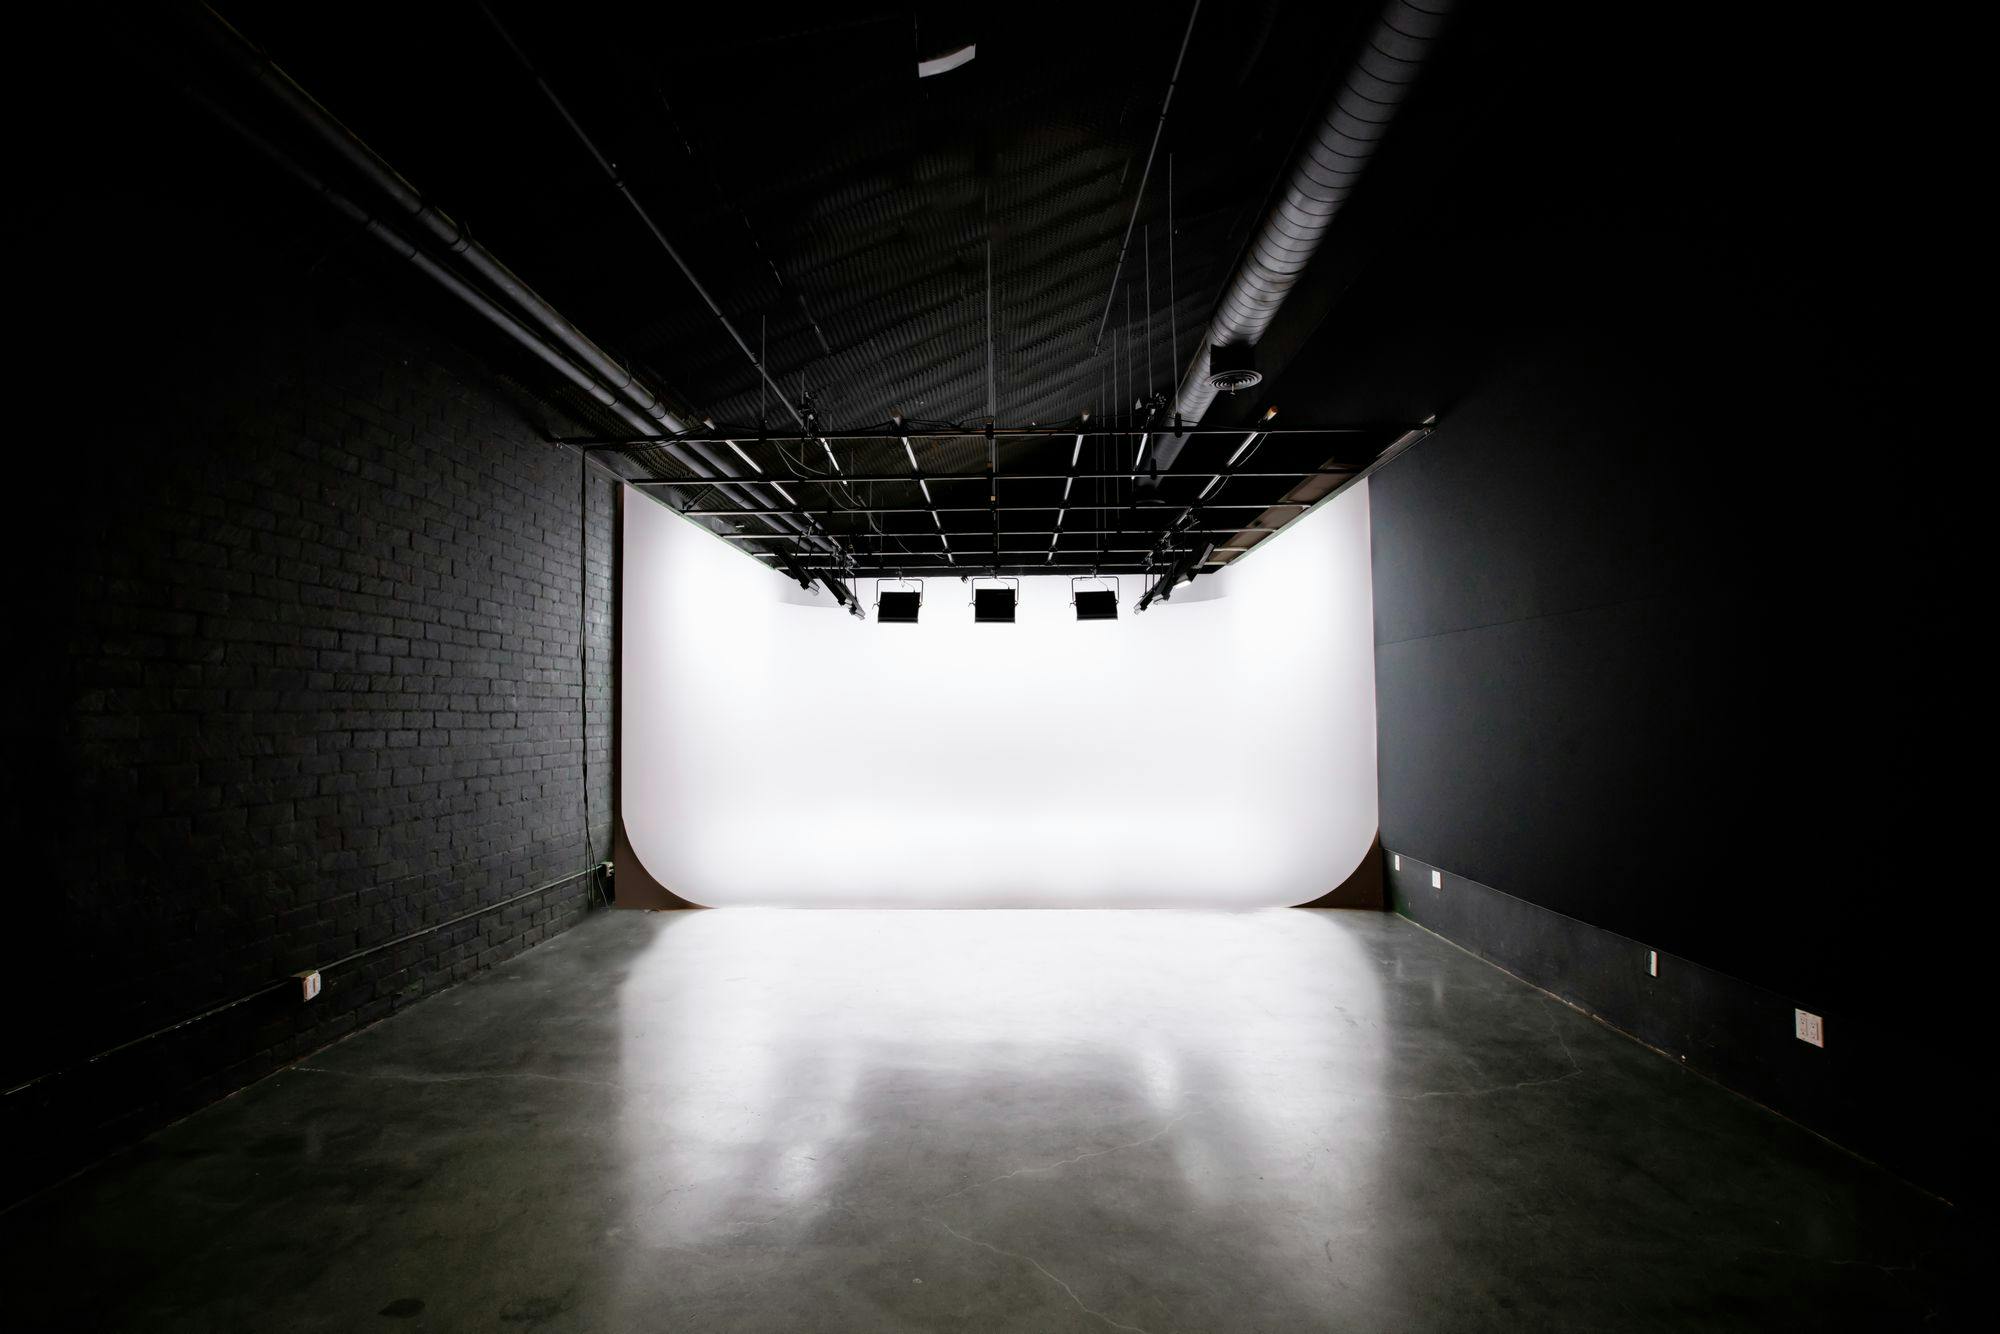 The image shows Studio B with a spacious, well-lit three-walled cyclorama and an 11-foot grid overhead, surrounded by dark walls and a polished concrete floor.